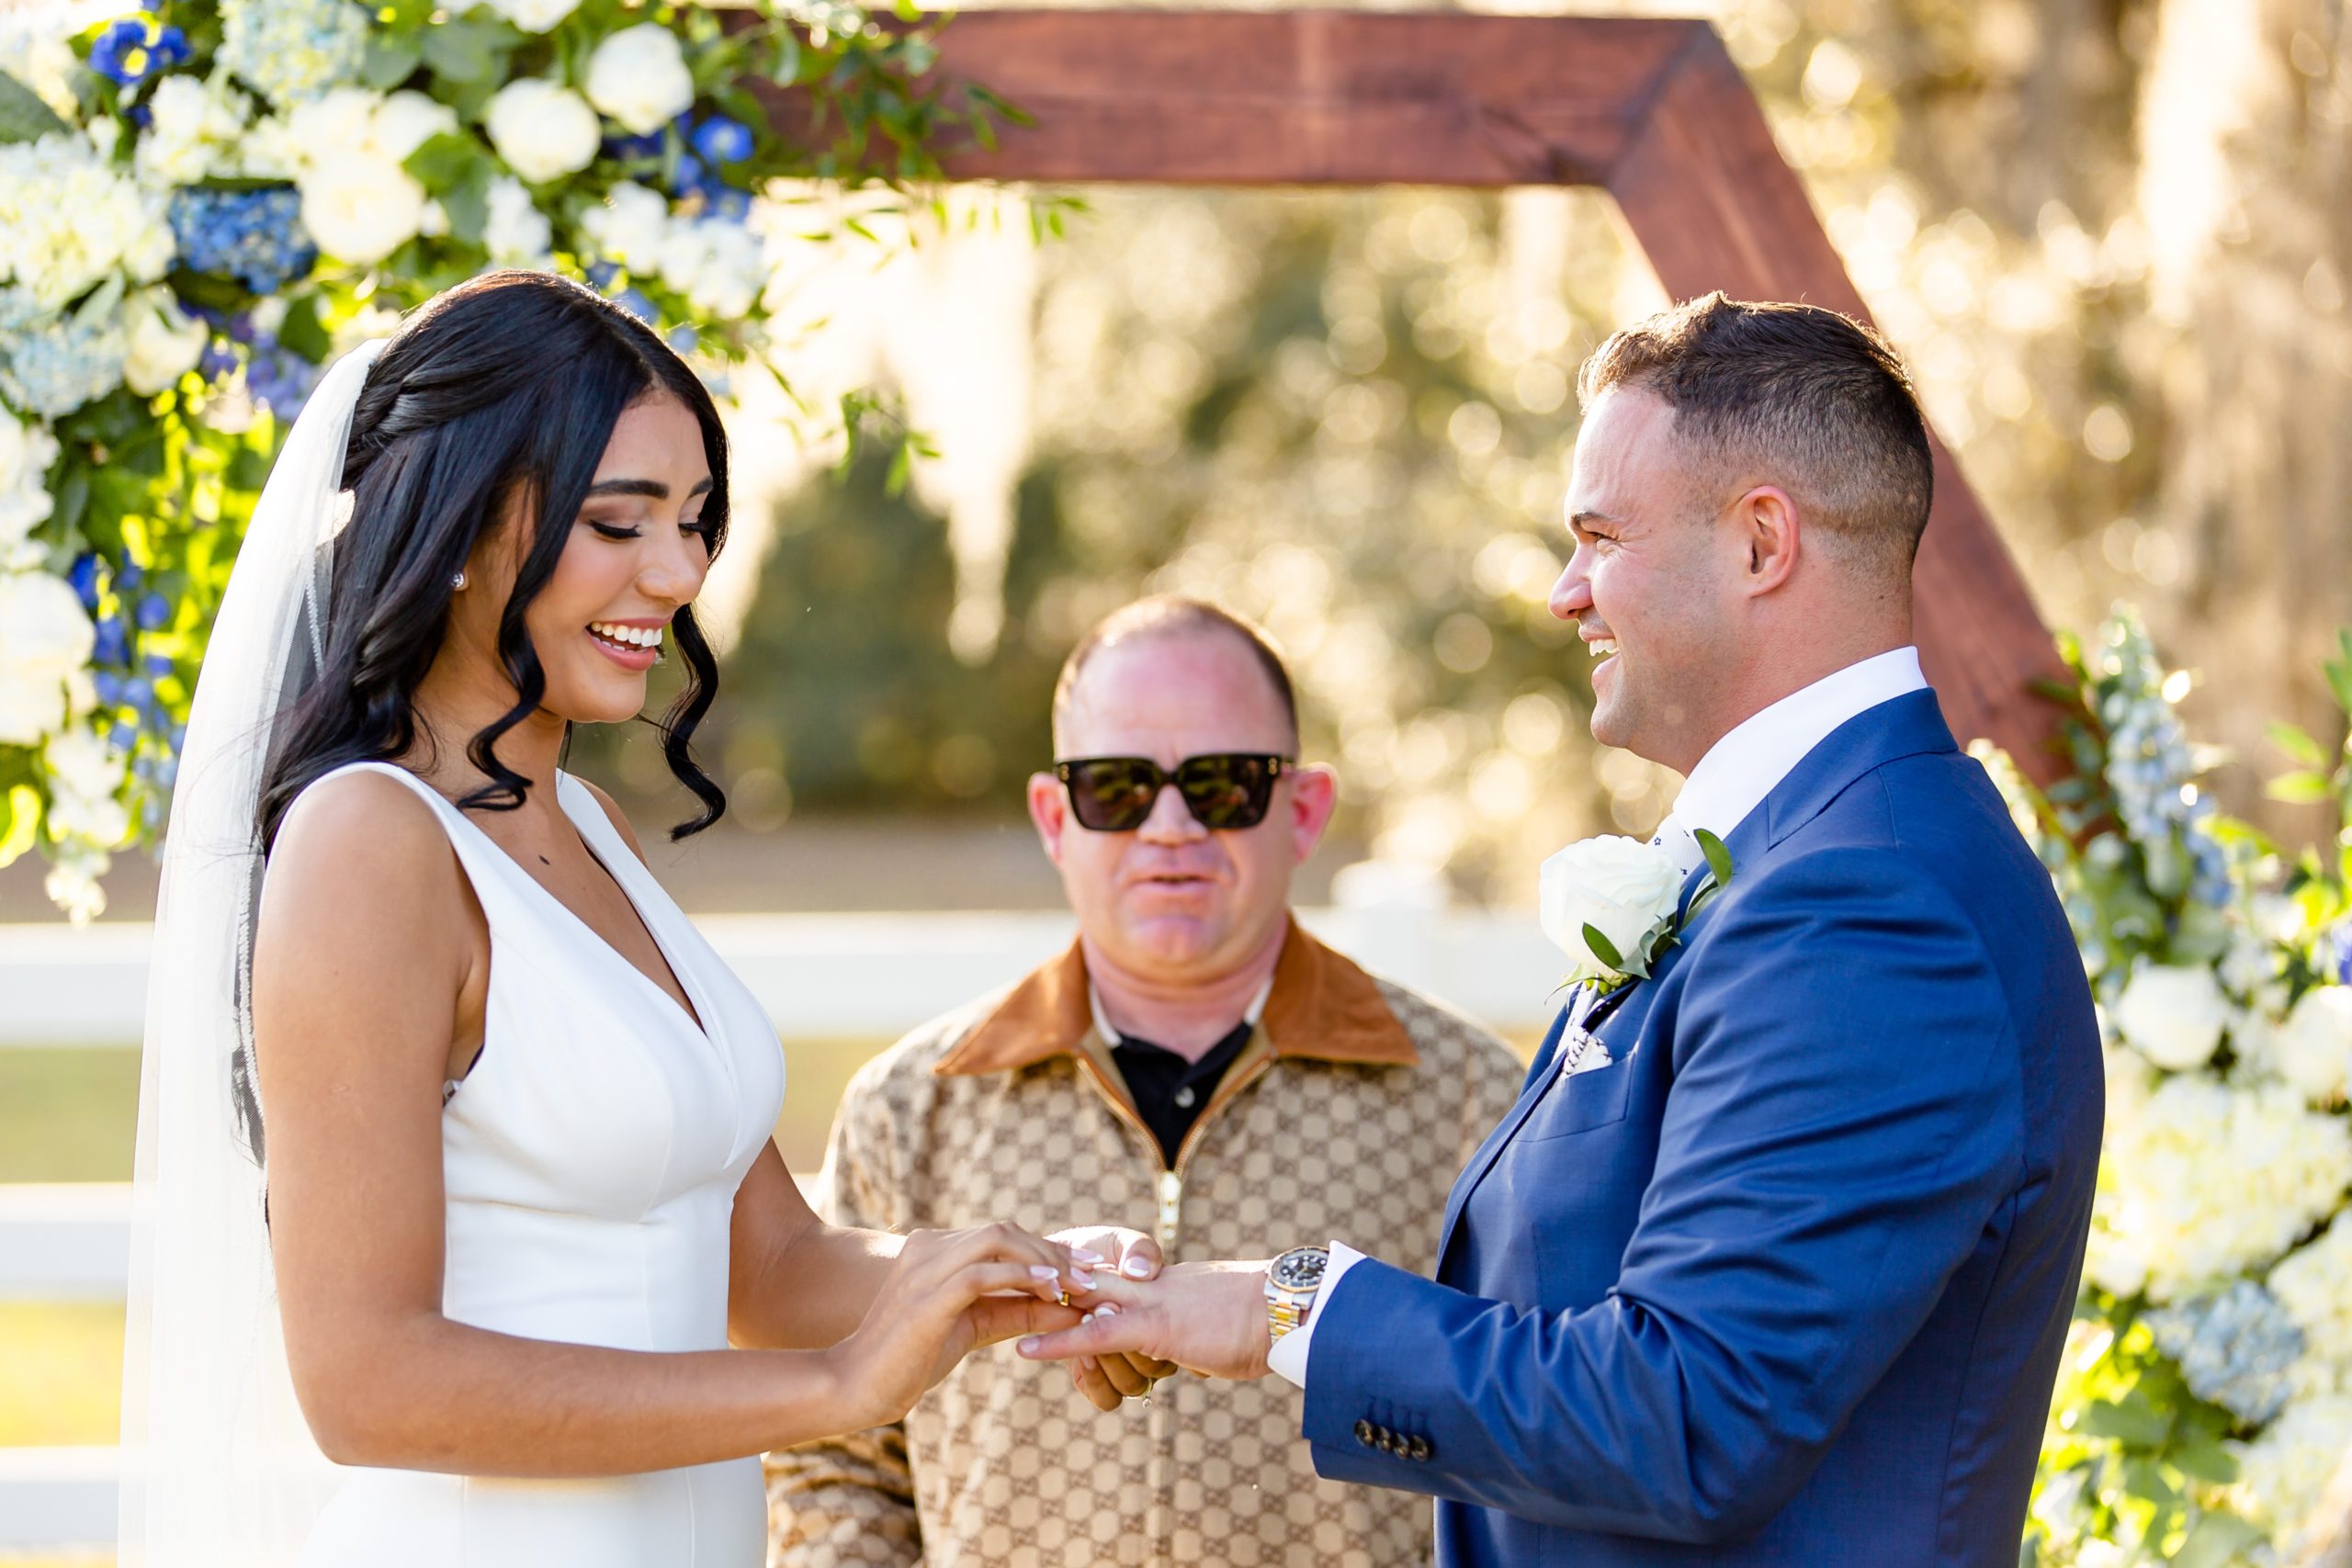 Patrick and Thaís 90 Day Fiance Wedding - Bride and Groom exchanging rings during wedding ceremony